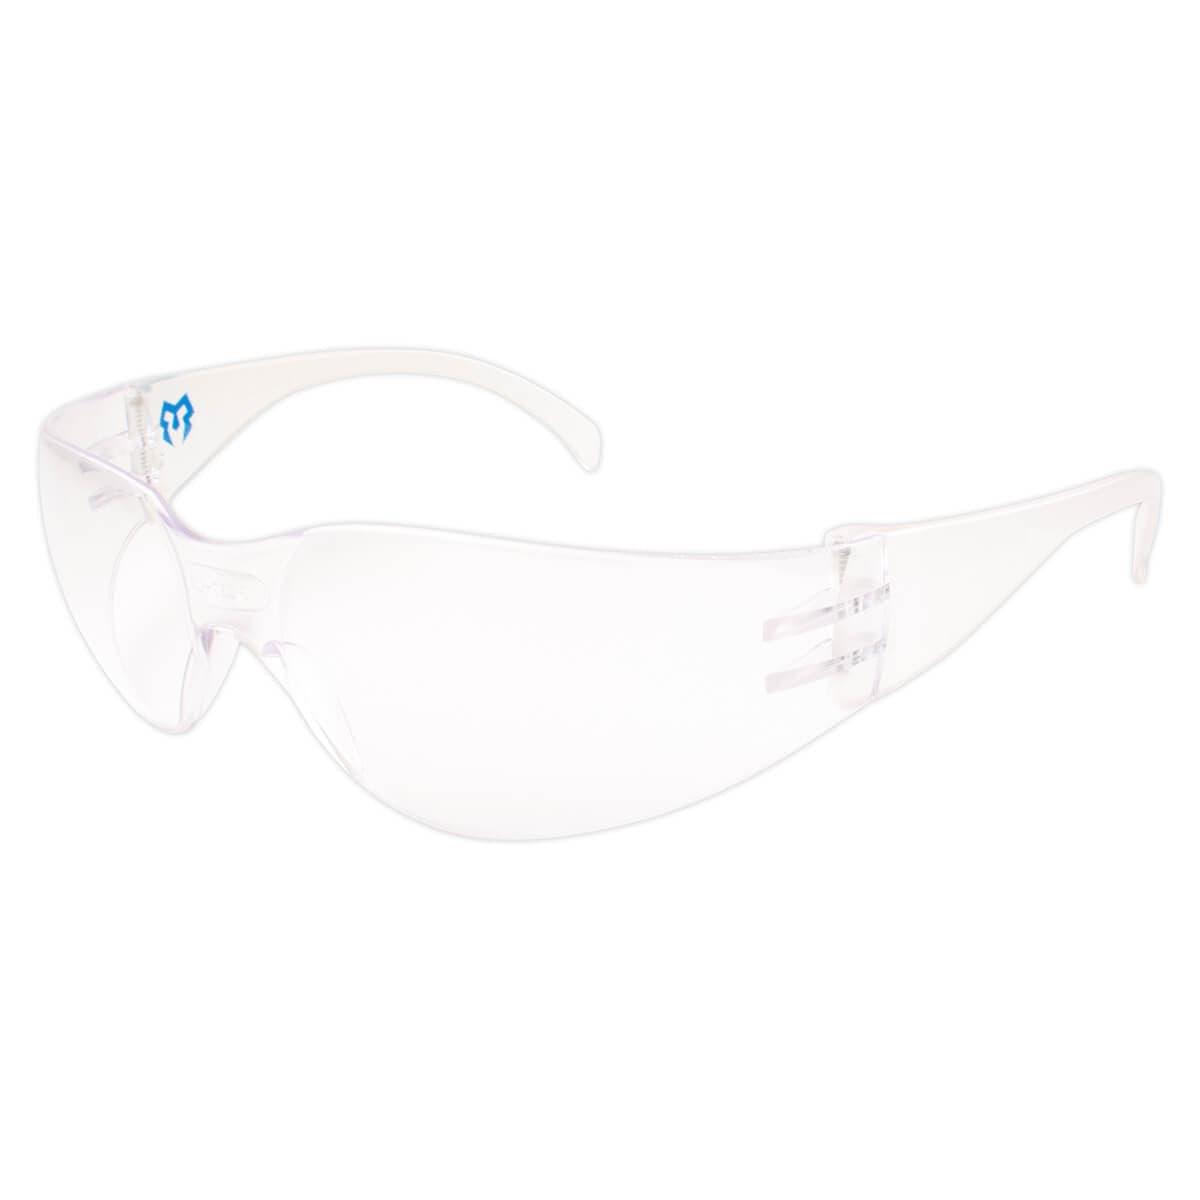 METEL M10 Safety Glasses with Clear Anti-Fog Lenses